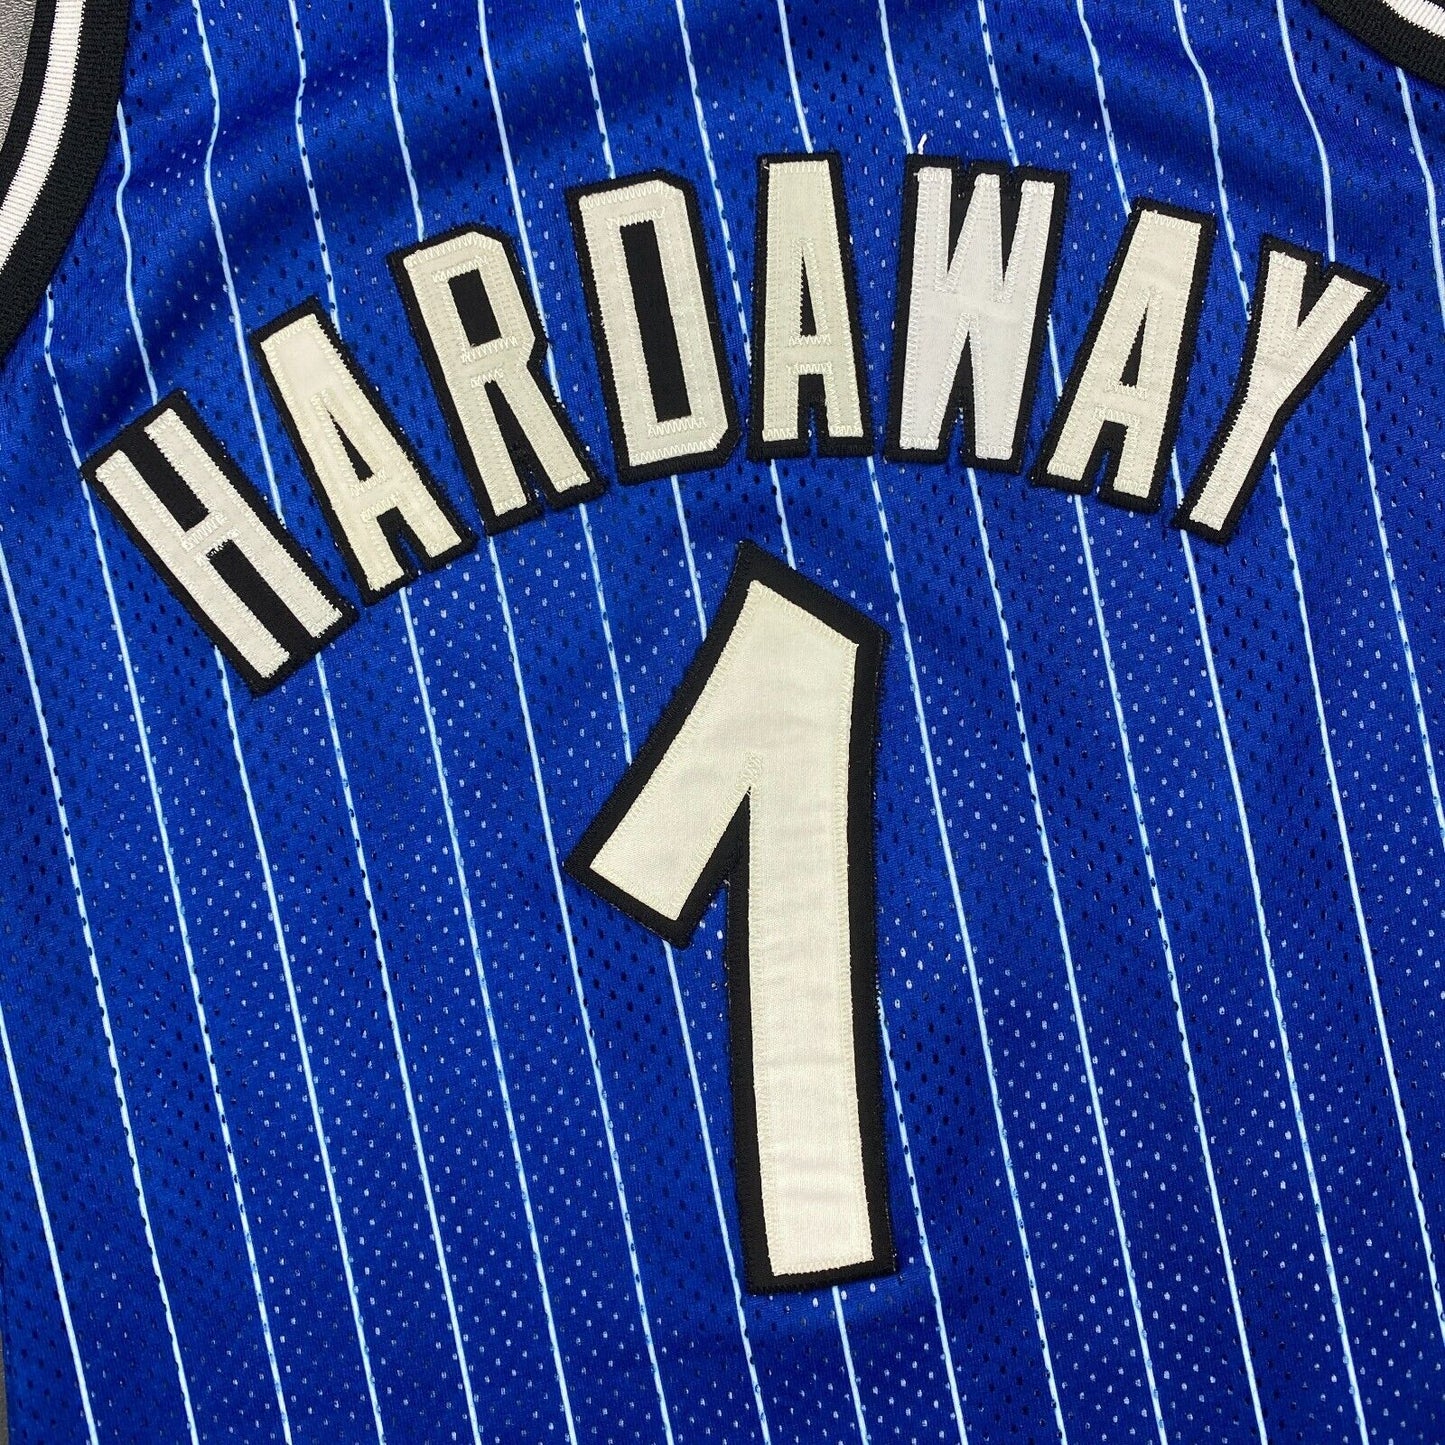 100% Authentic Penny Hardaway Vintage Champion 95 96 Magic Jersey Size 40 M